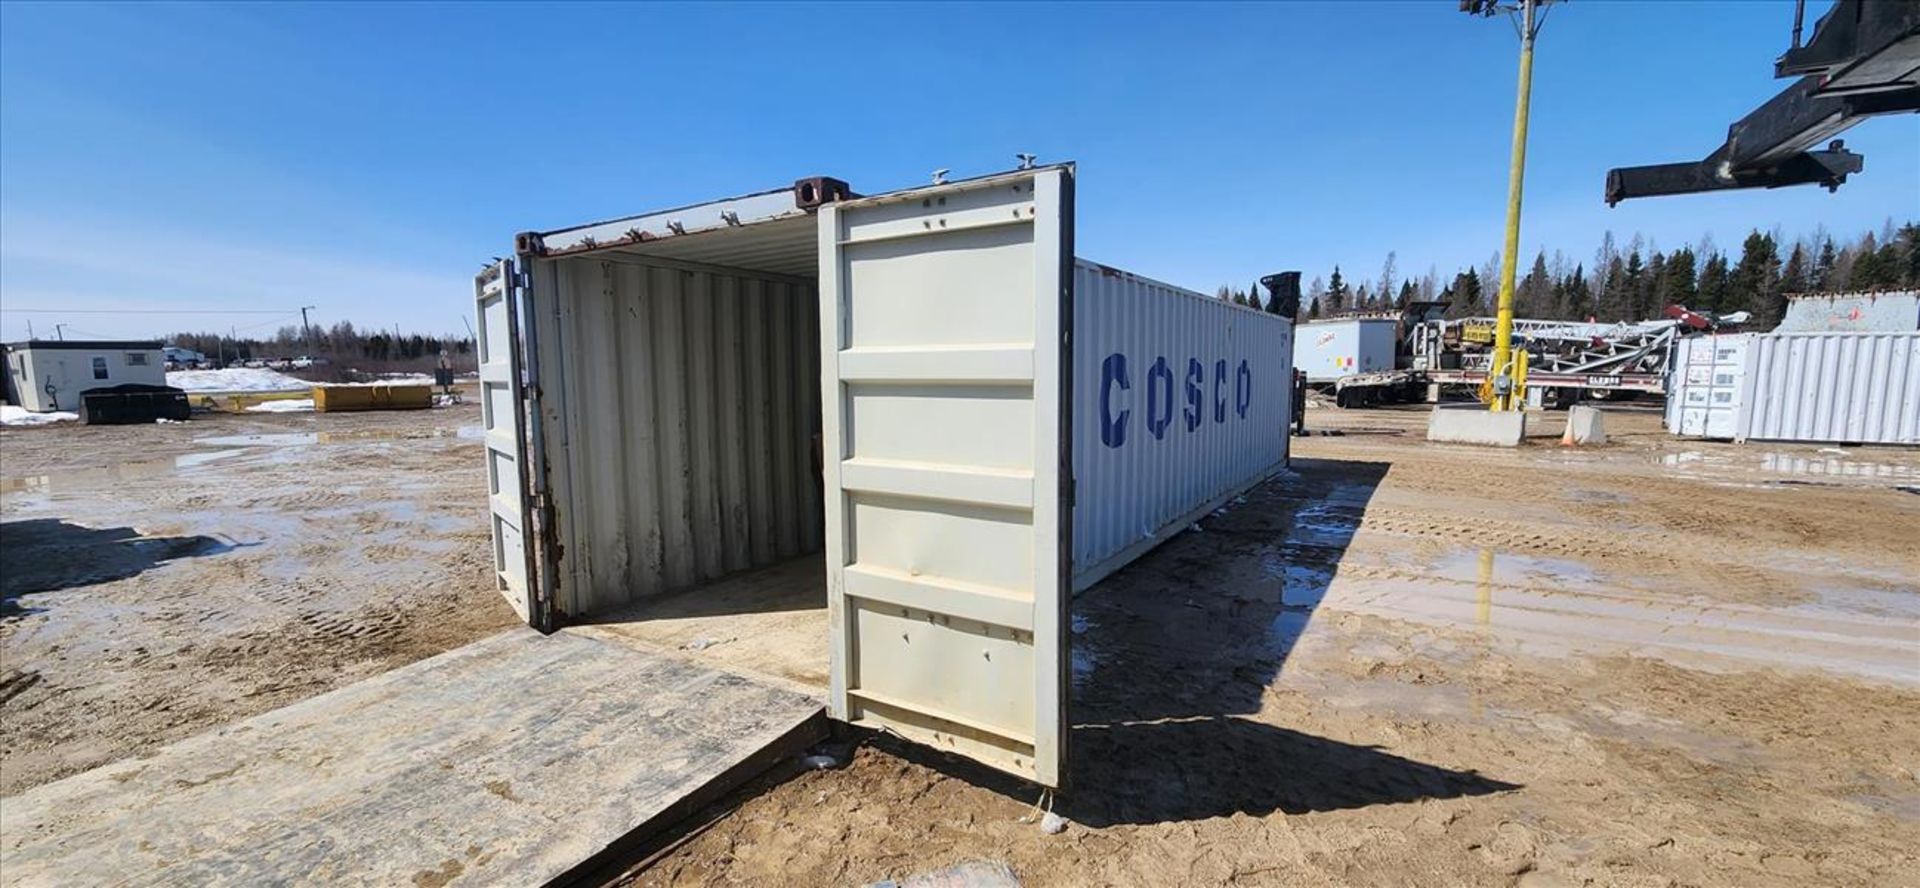 sea container, 40 ft. c/w contents: poly mesh rolls (Asset Location: Hallnor Yard) {Day 1} [TAG 1409 - Image 3 of 4